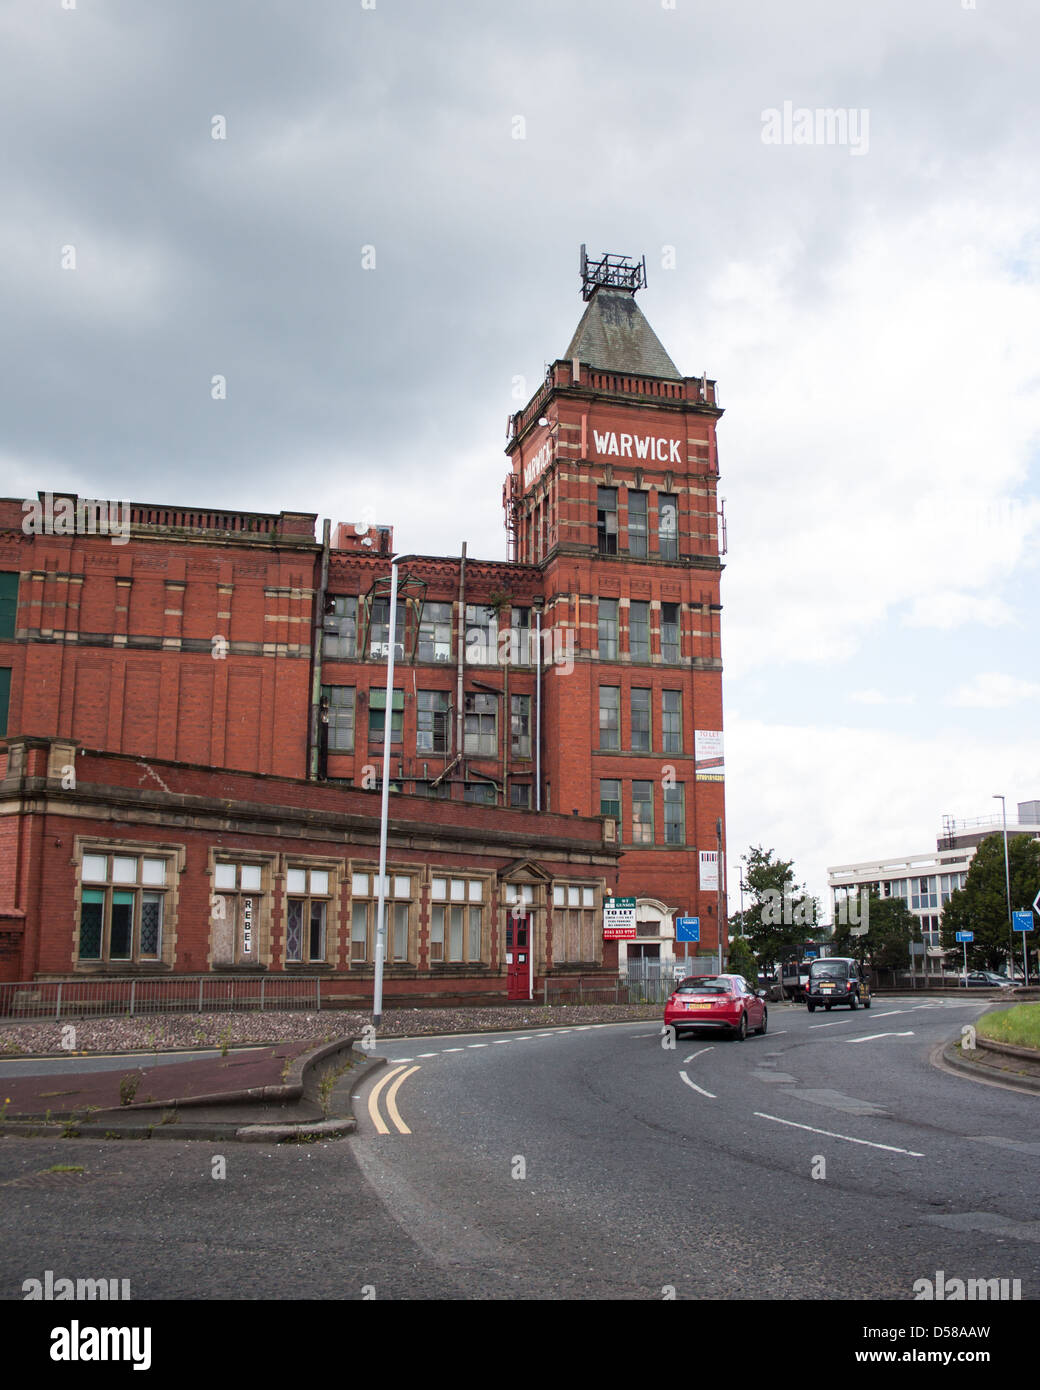 The Warwick Mill, Middleton, Manchester as seen from Oldham Road, Stock Photo